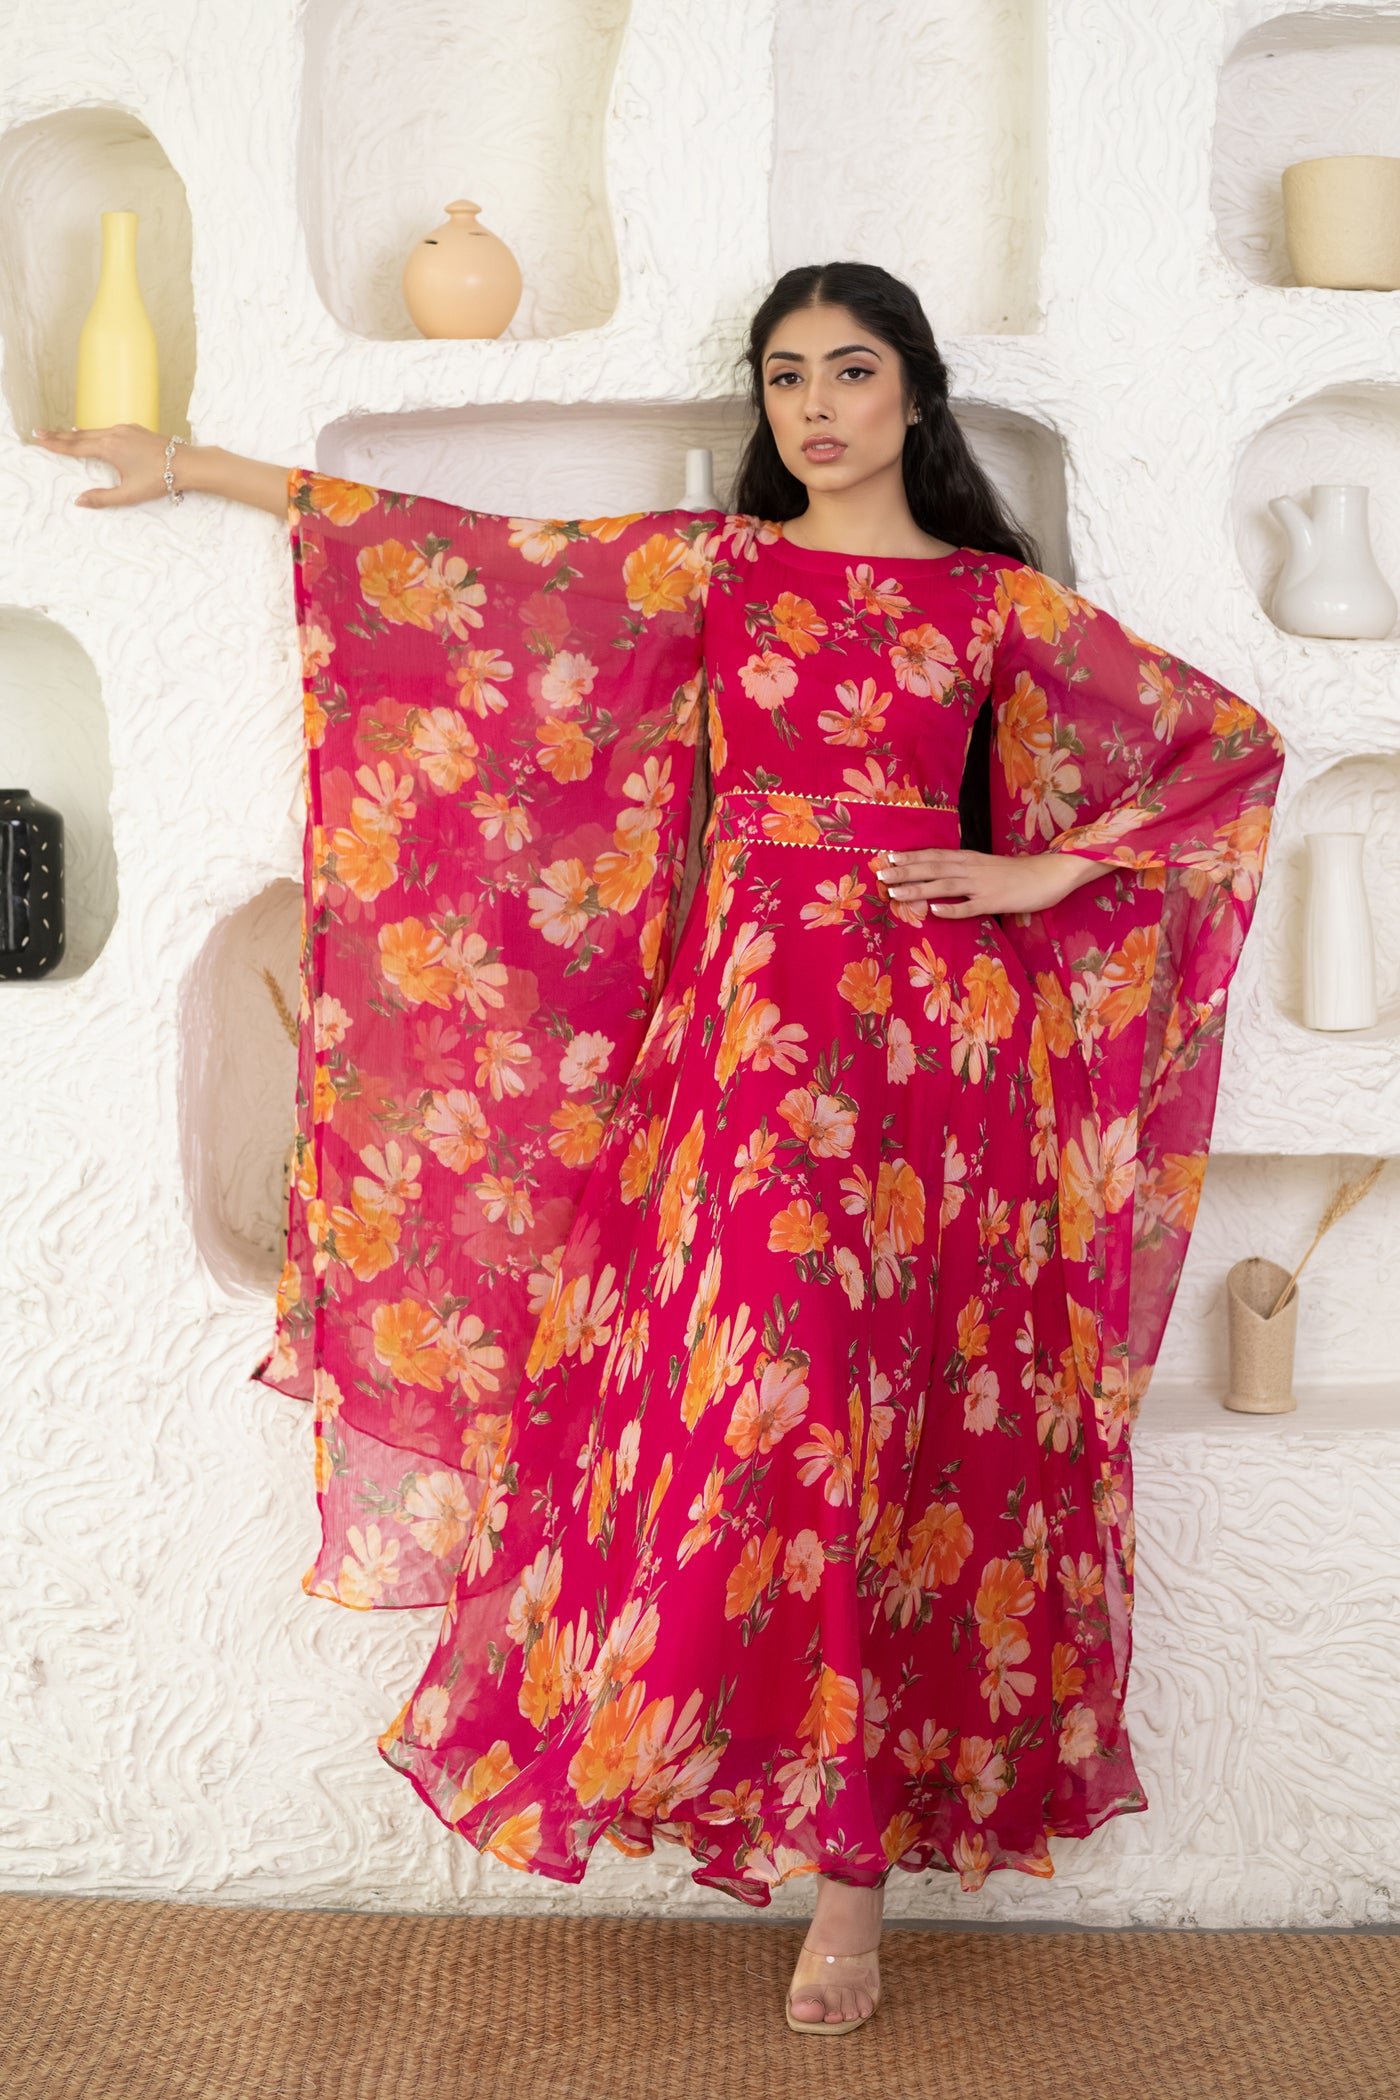 Pink Indo-western maxi dress by Saras the label- 2 pcs set